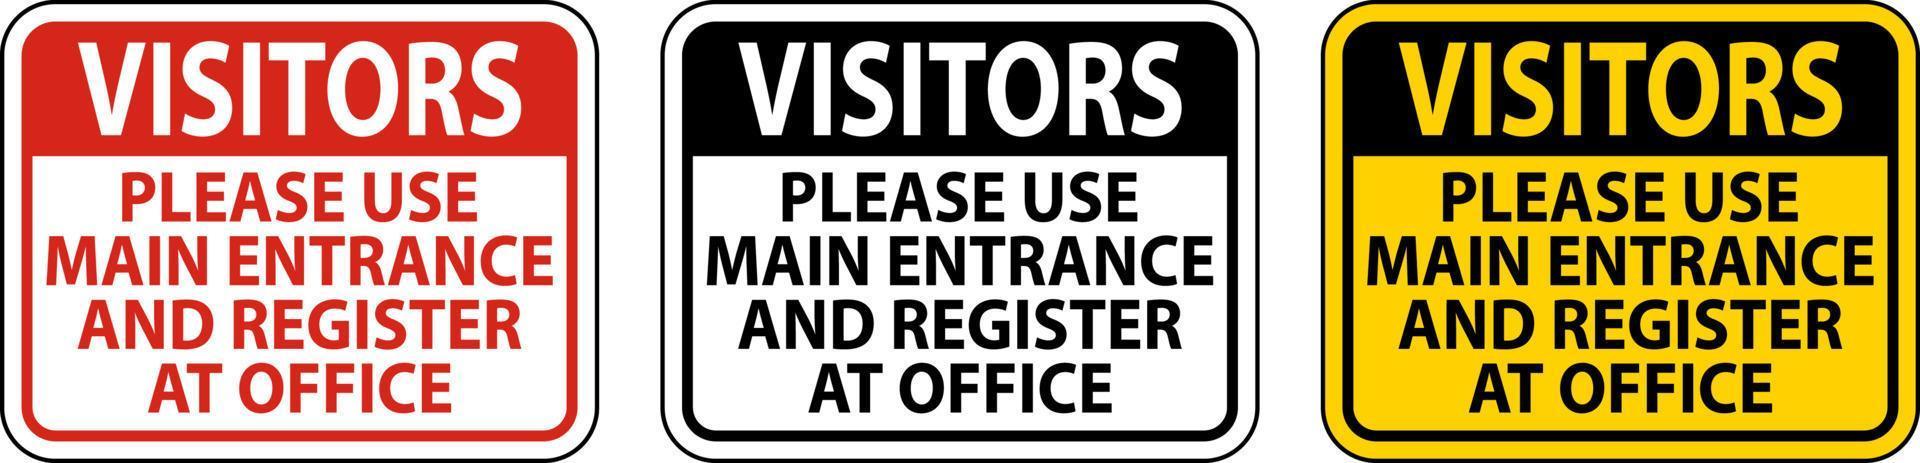 Visitors Use Main Entrance Sign On White Background vector